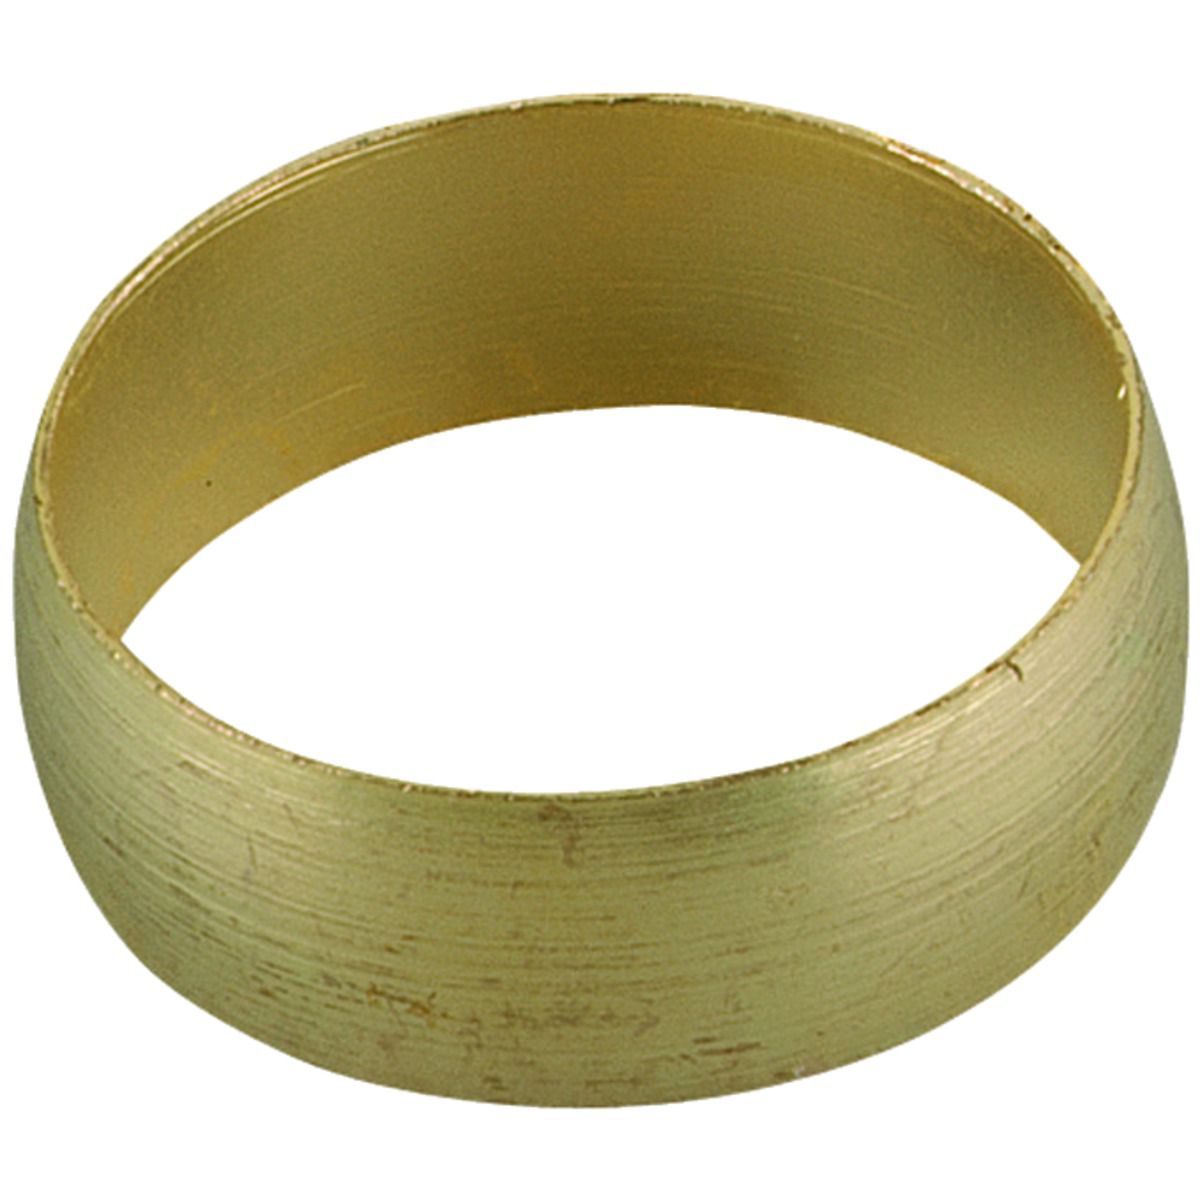 Image of Primaflow Brass Compression Olive Ring - 15mm Pack Of 8